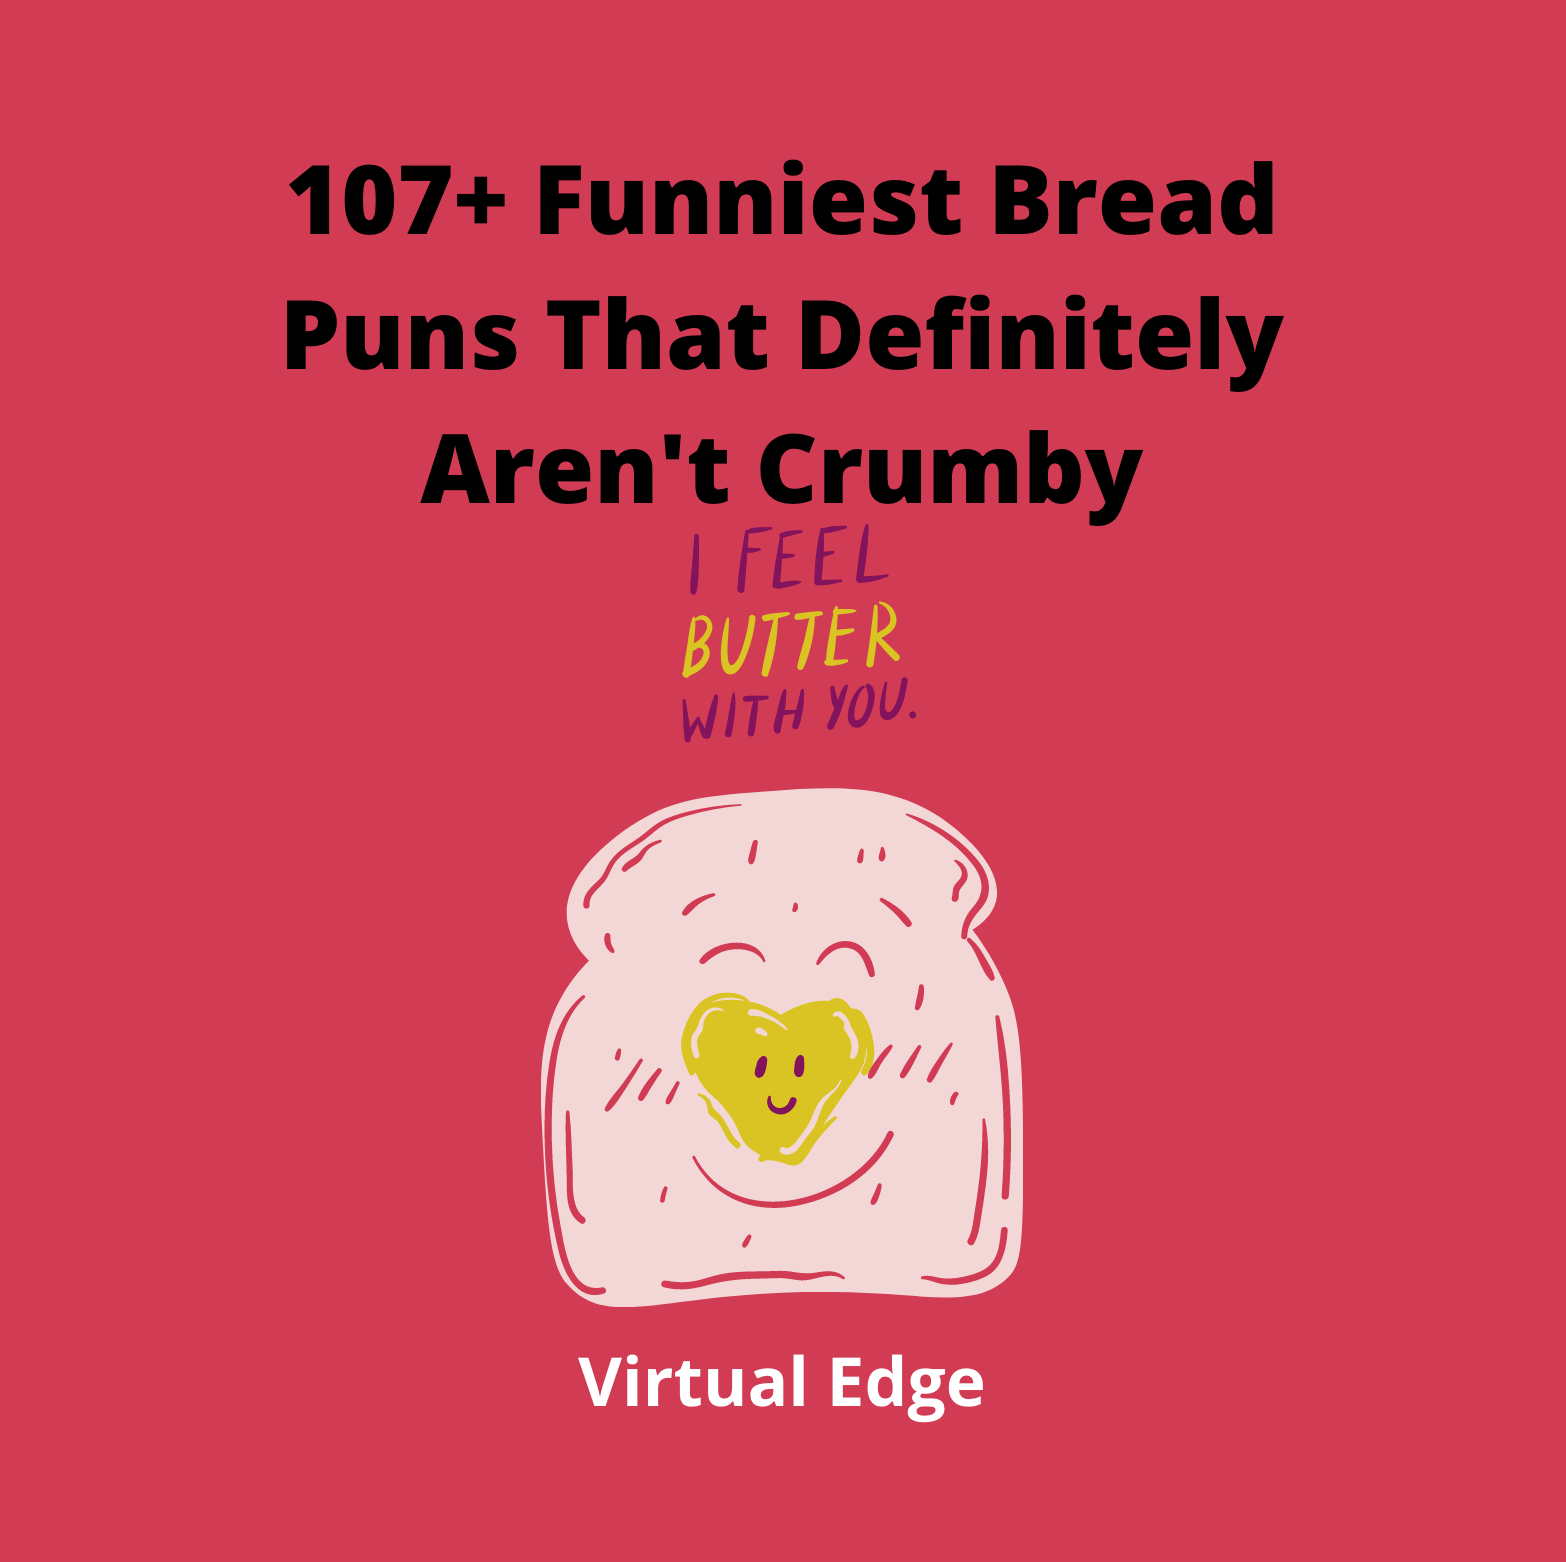 107+ Funniest Bread Puns That Definitely Aren't Crumby